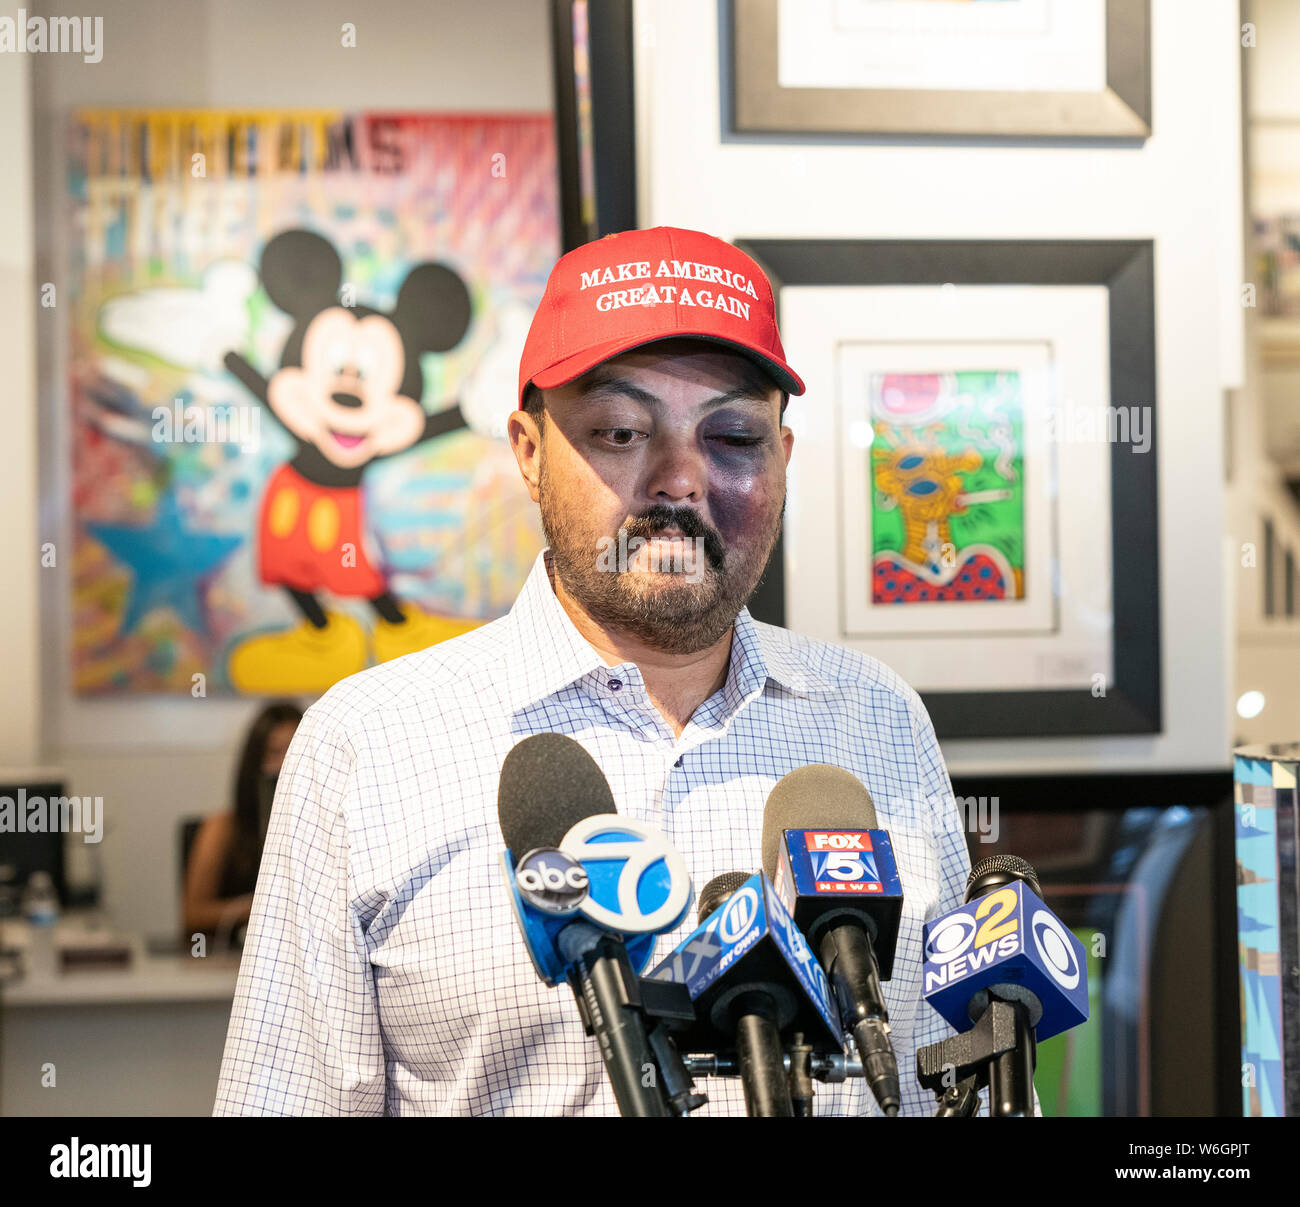 New York, United States. 01st Aug, 2019. Jahangir Turan speaks at press conference after being beaten for wearing MAGA hat on the street of New York City by 15 teenagers at David Parker Gallery. Credit: Lev Radin/Pacific Press/Alamy Live News Stock Photo